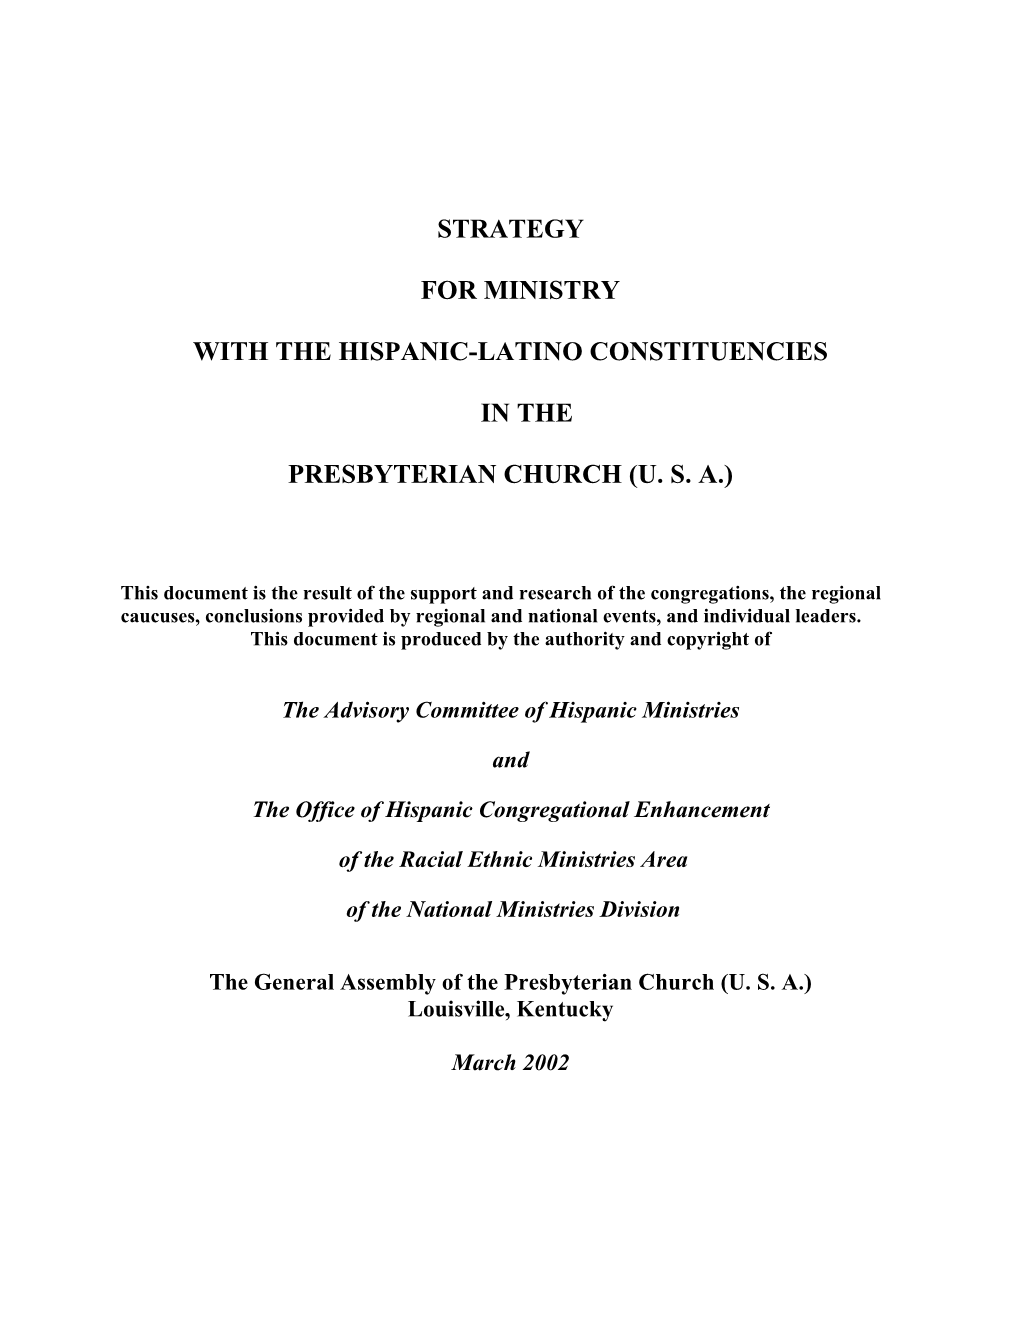 Strategy for Ministry with the Hispanic-Latino Constituencies in The